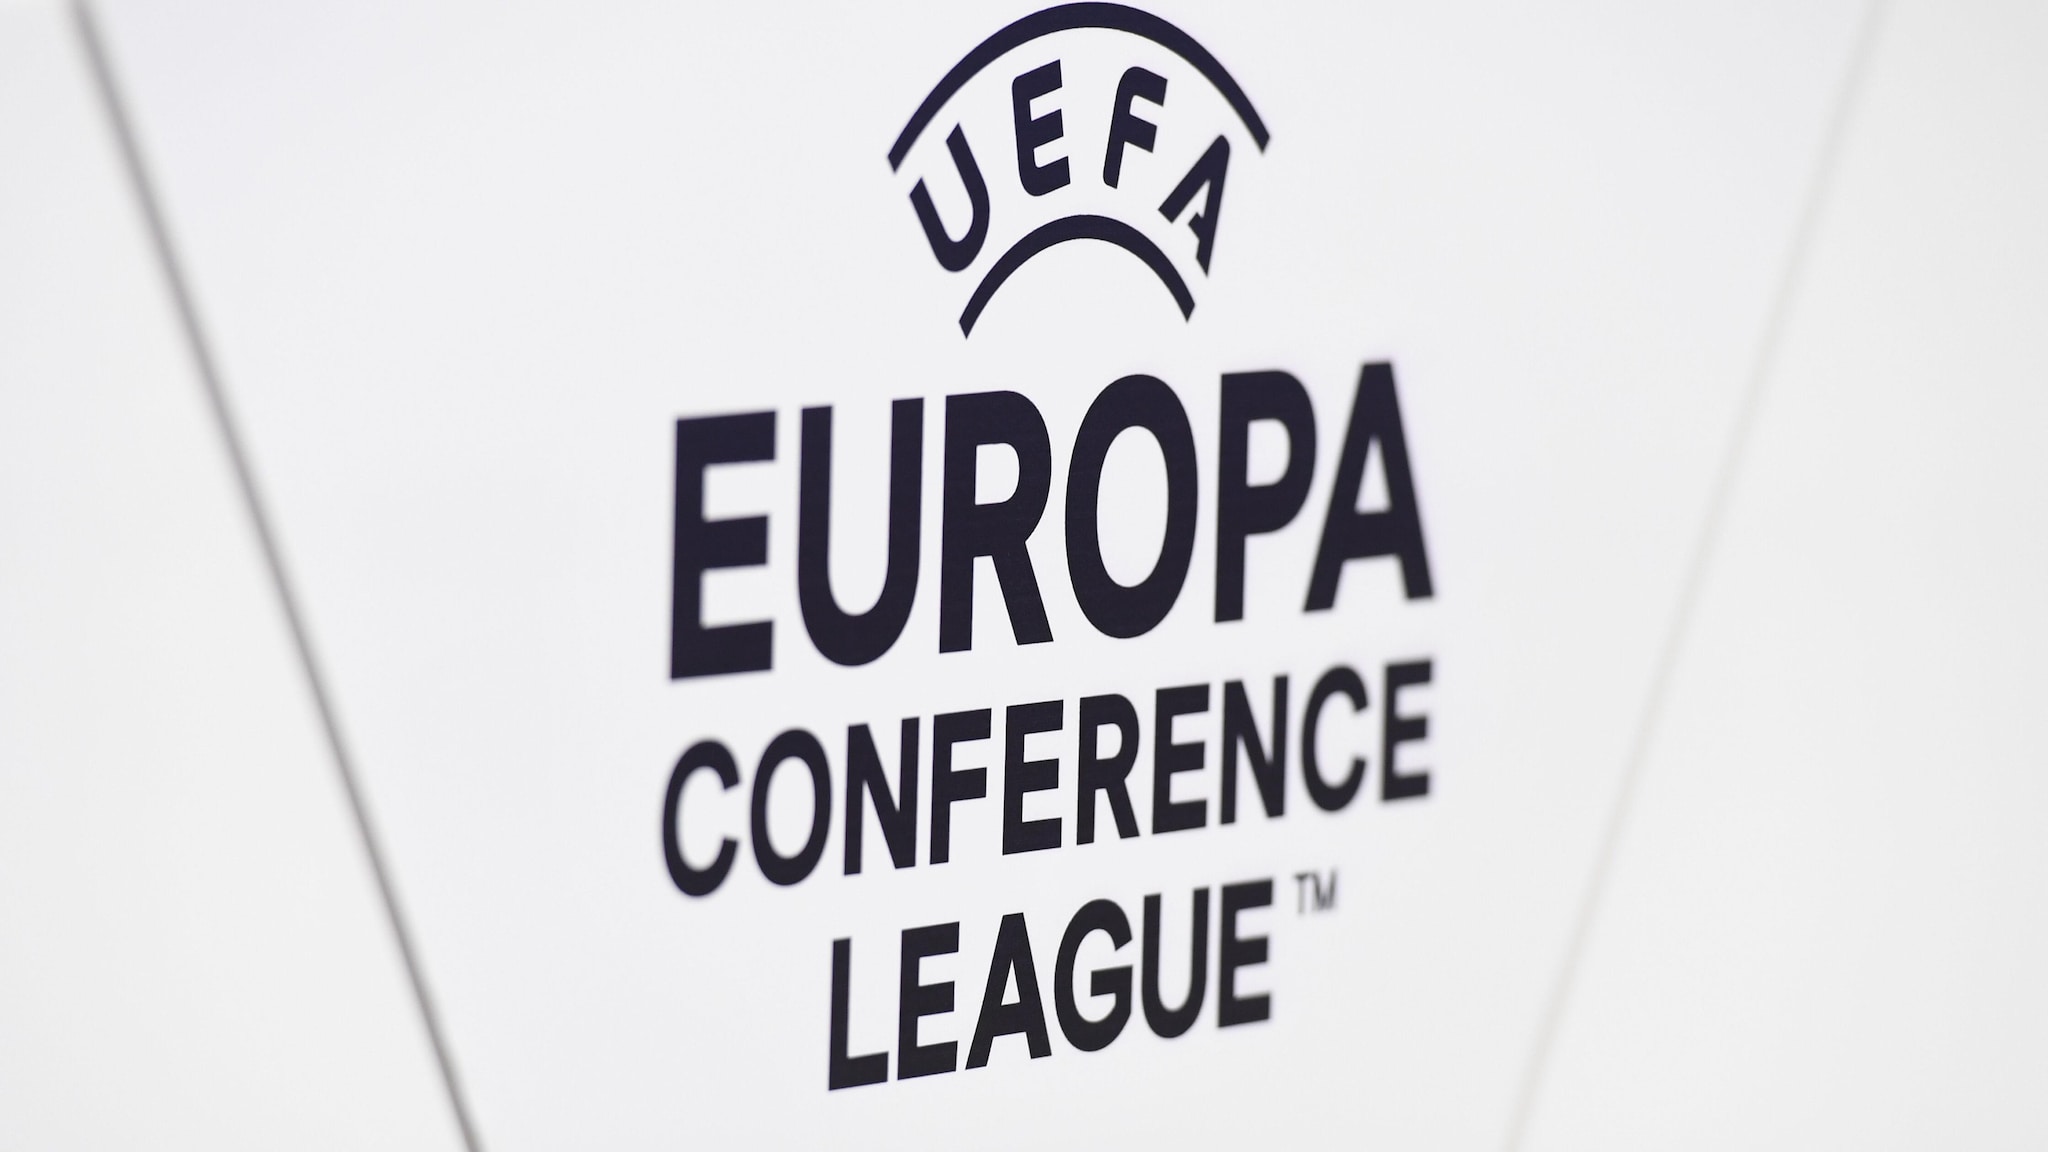 UEFA Europa Conference League What is it? How does it work? Why was it introduced? UEFA Europa Conference League UEFA